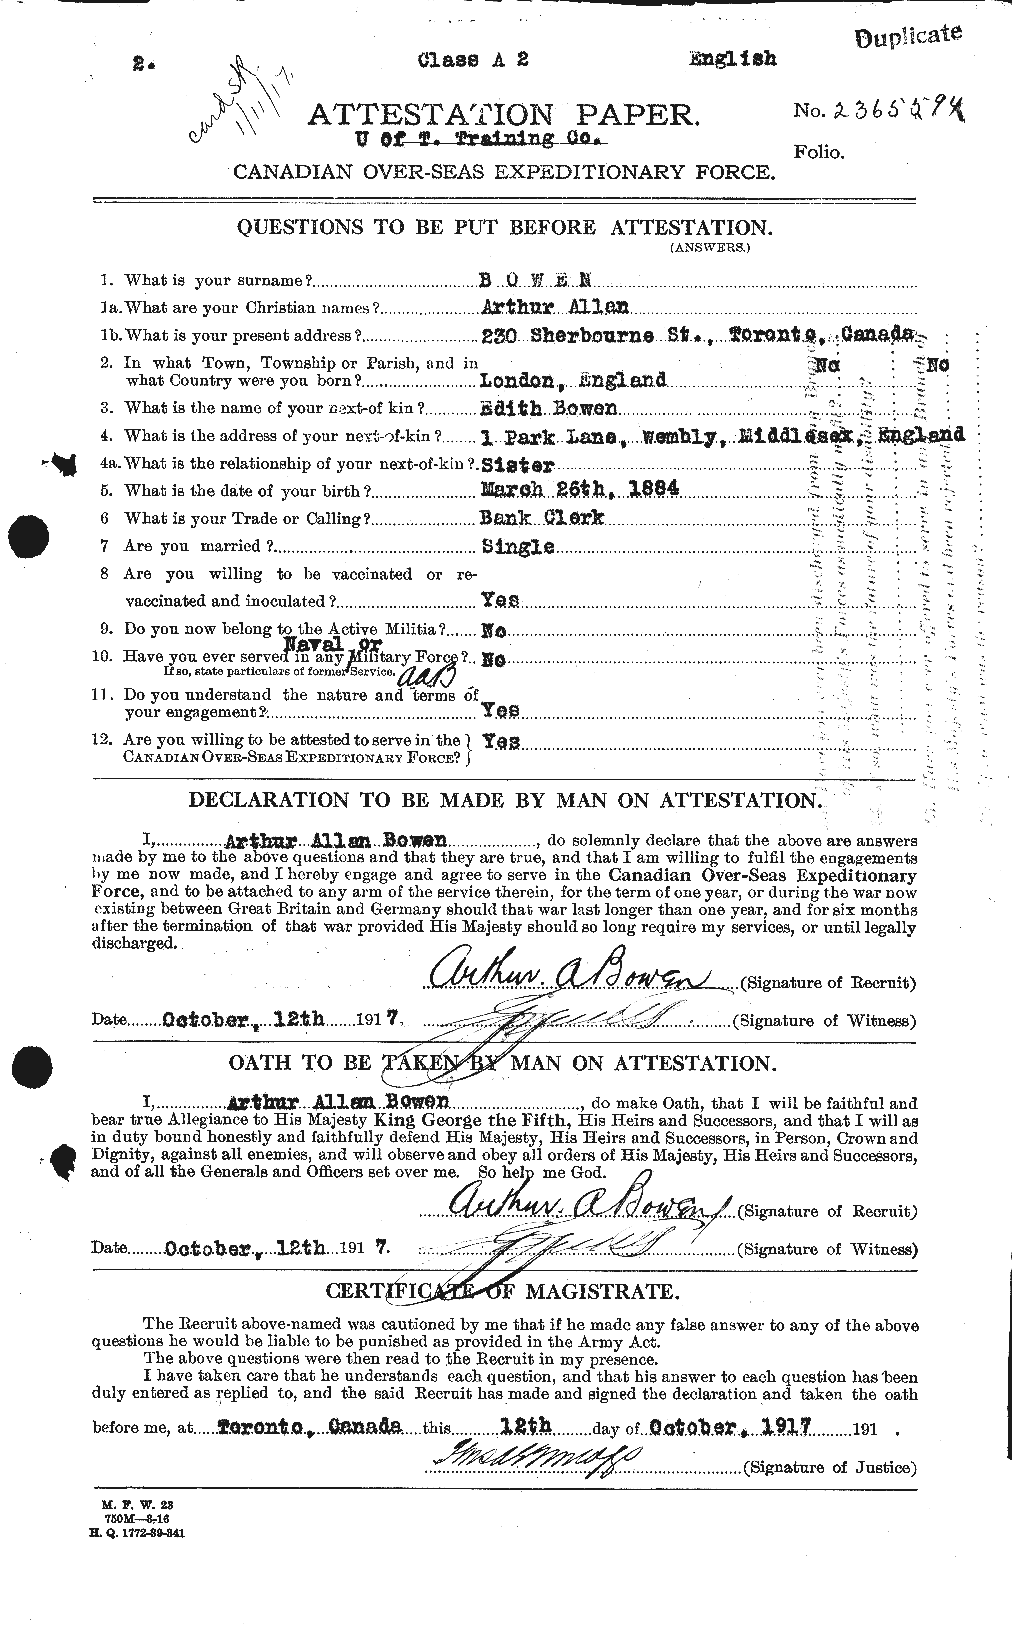 Personnel Records of the First World War - CEF 255355a